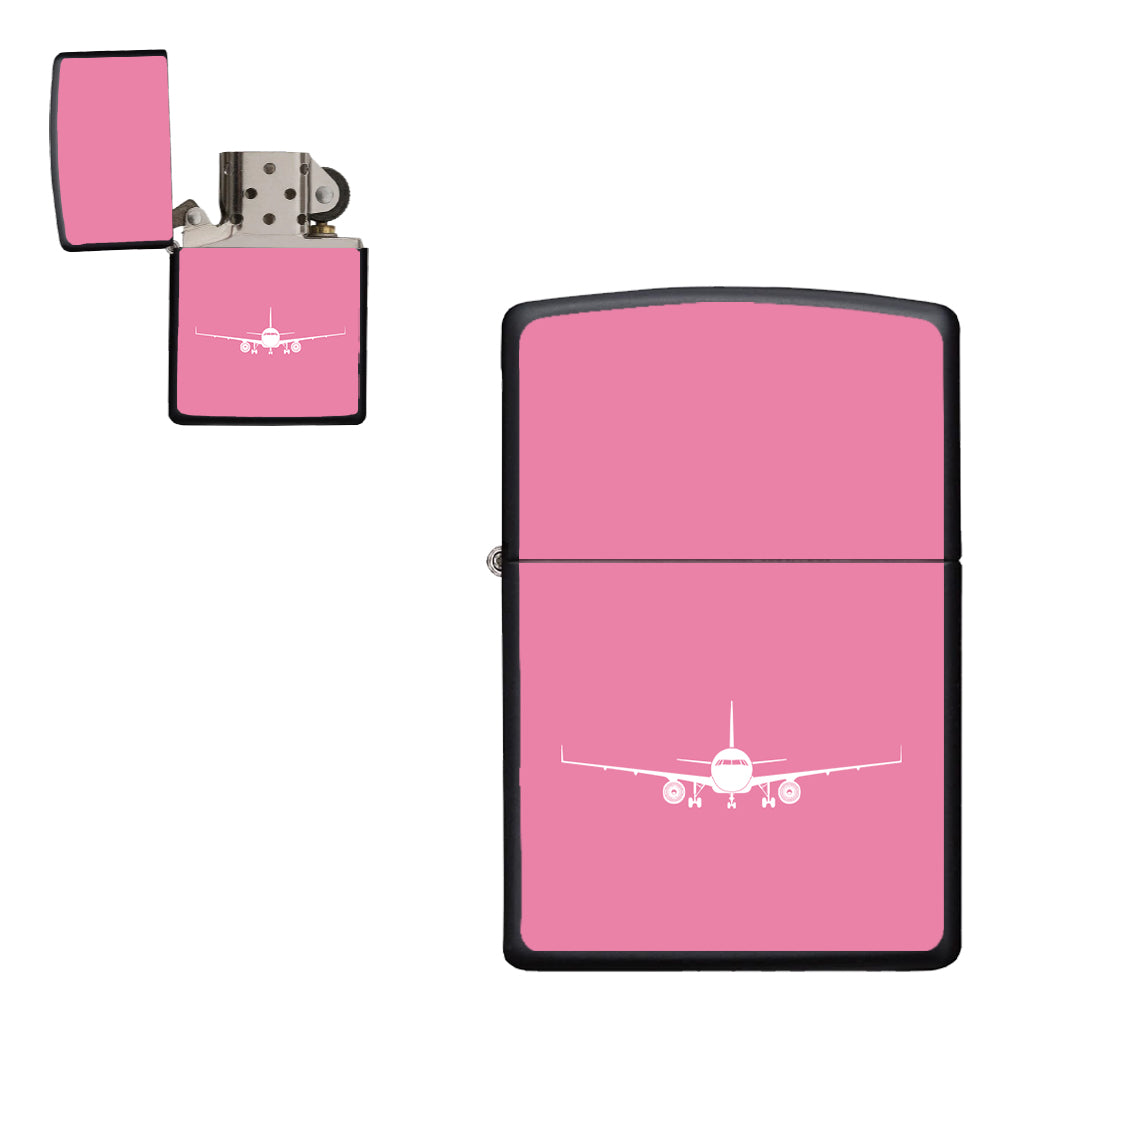 Airbus A320 Silhouette Designed Metal Lighters